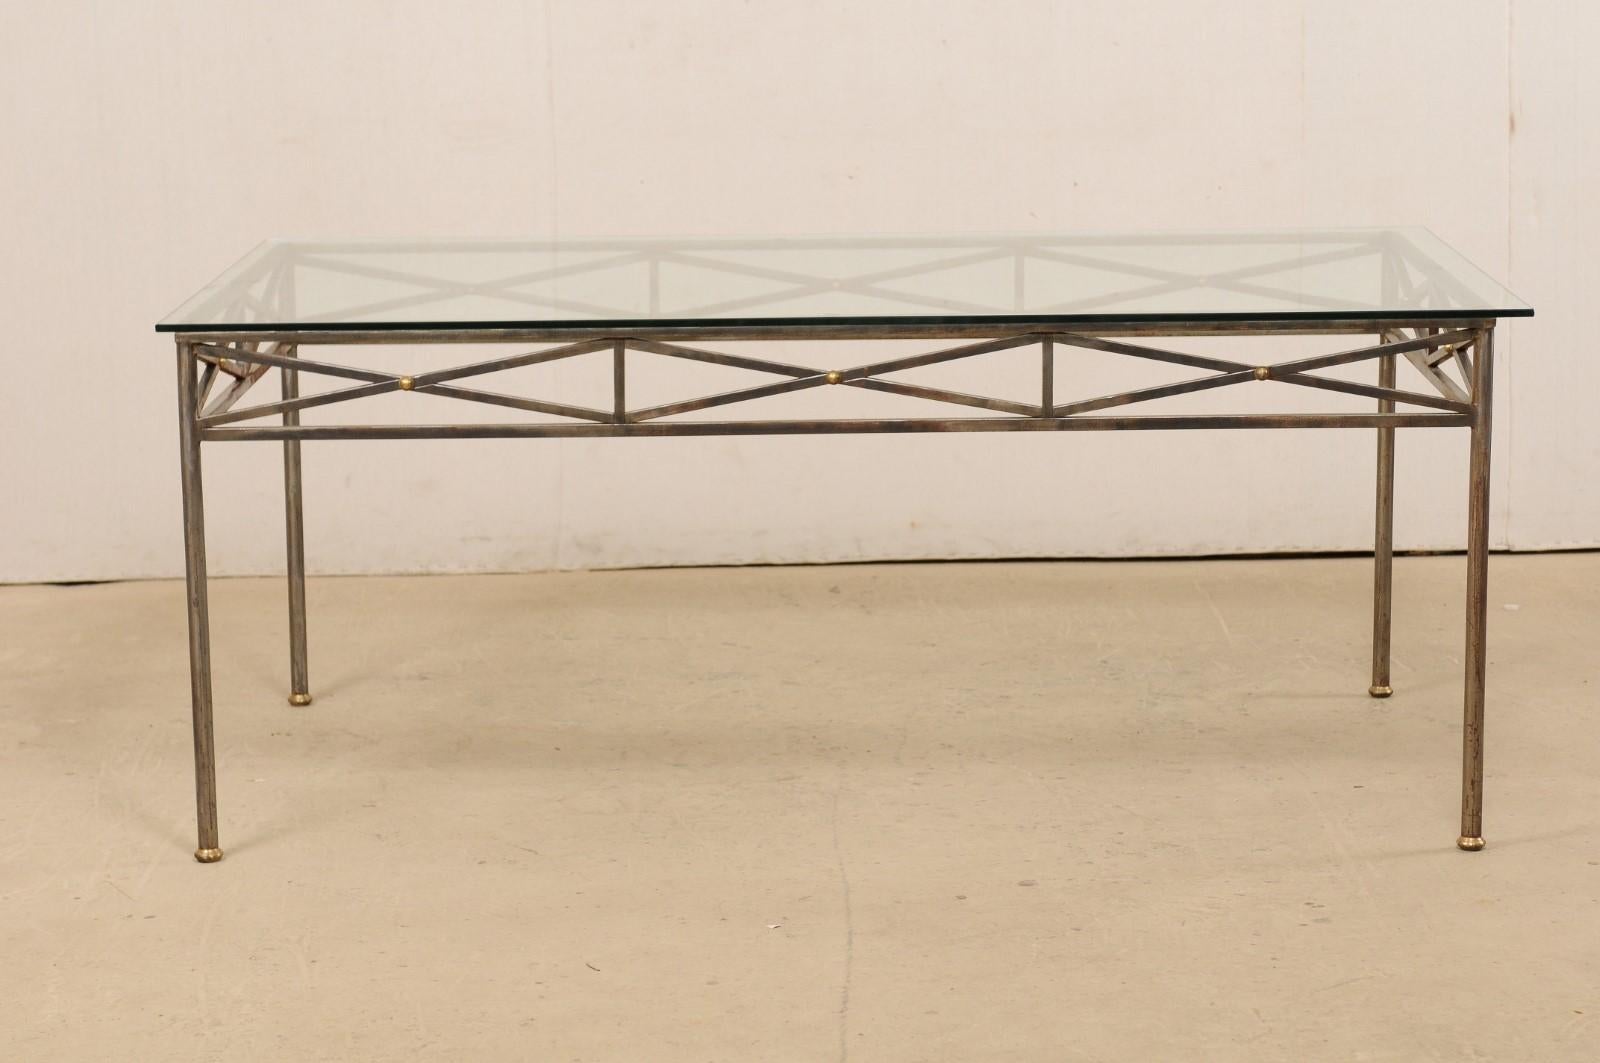 Neoclassical Inspired Metal Dining Table with Brass Accents and Glass Top For Sale 2